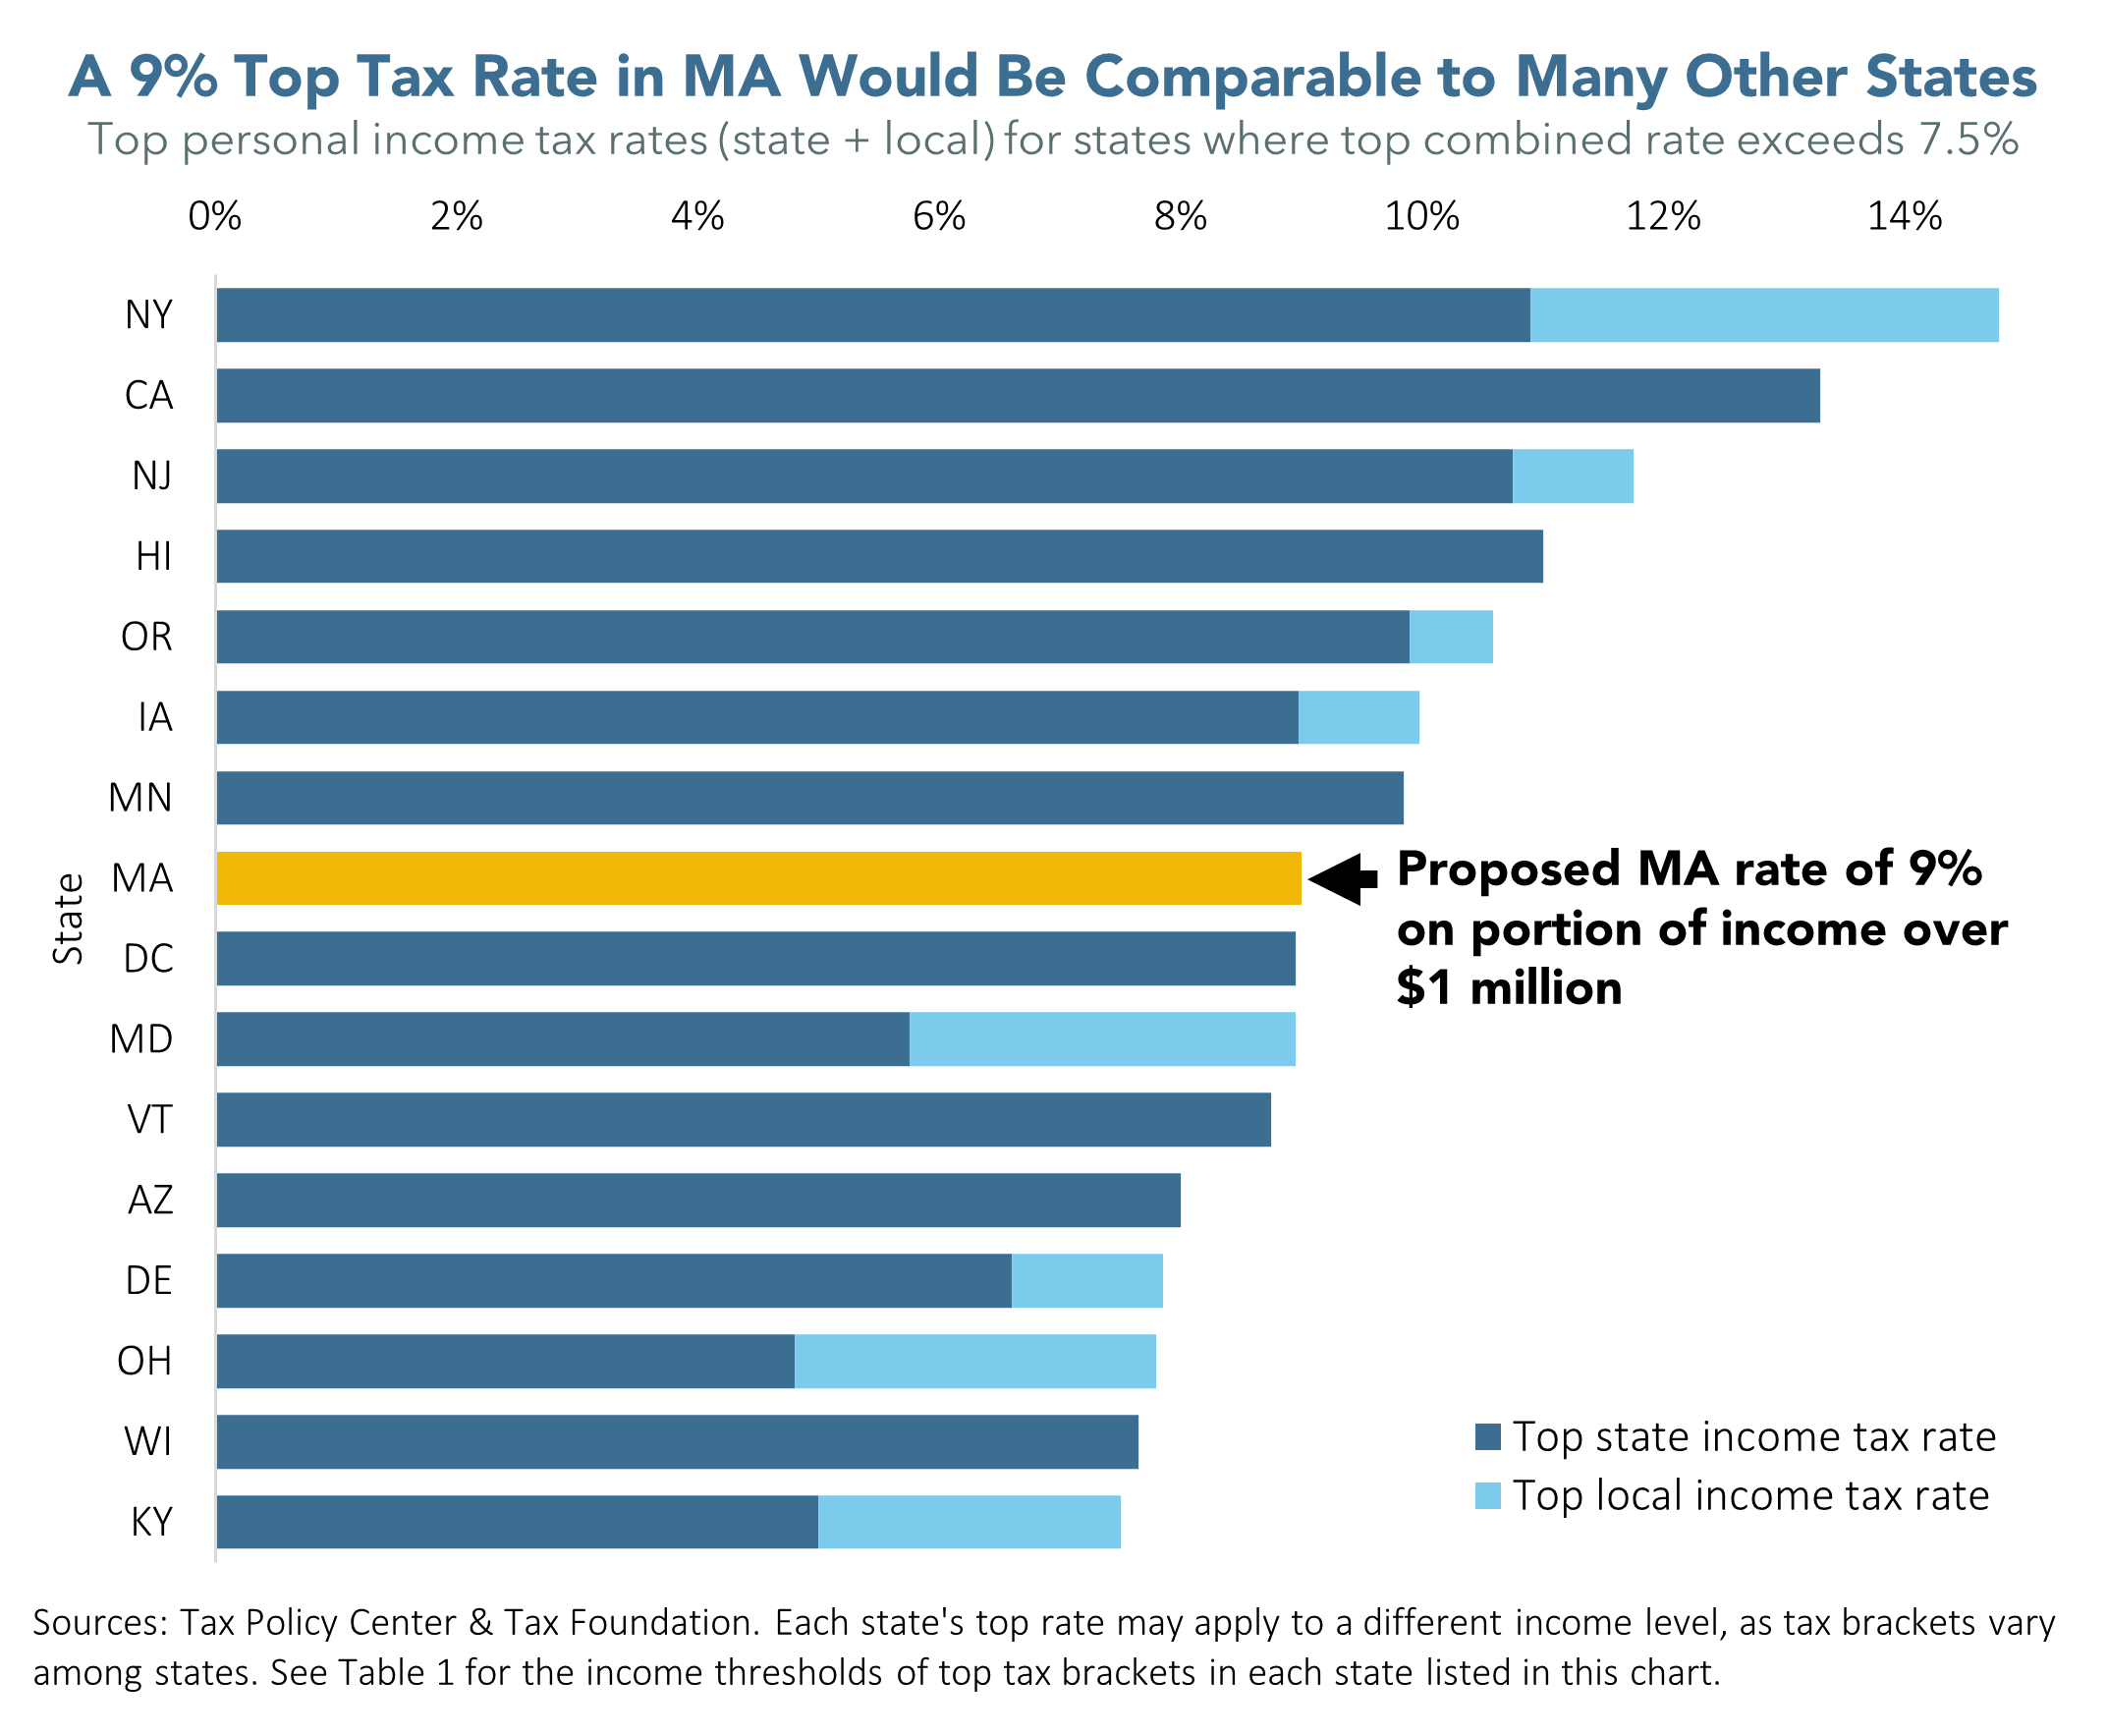 With Millionaire Tax Massachusetts Top Tax Rate Would Compare Well 